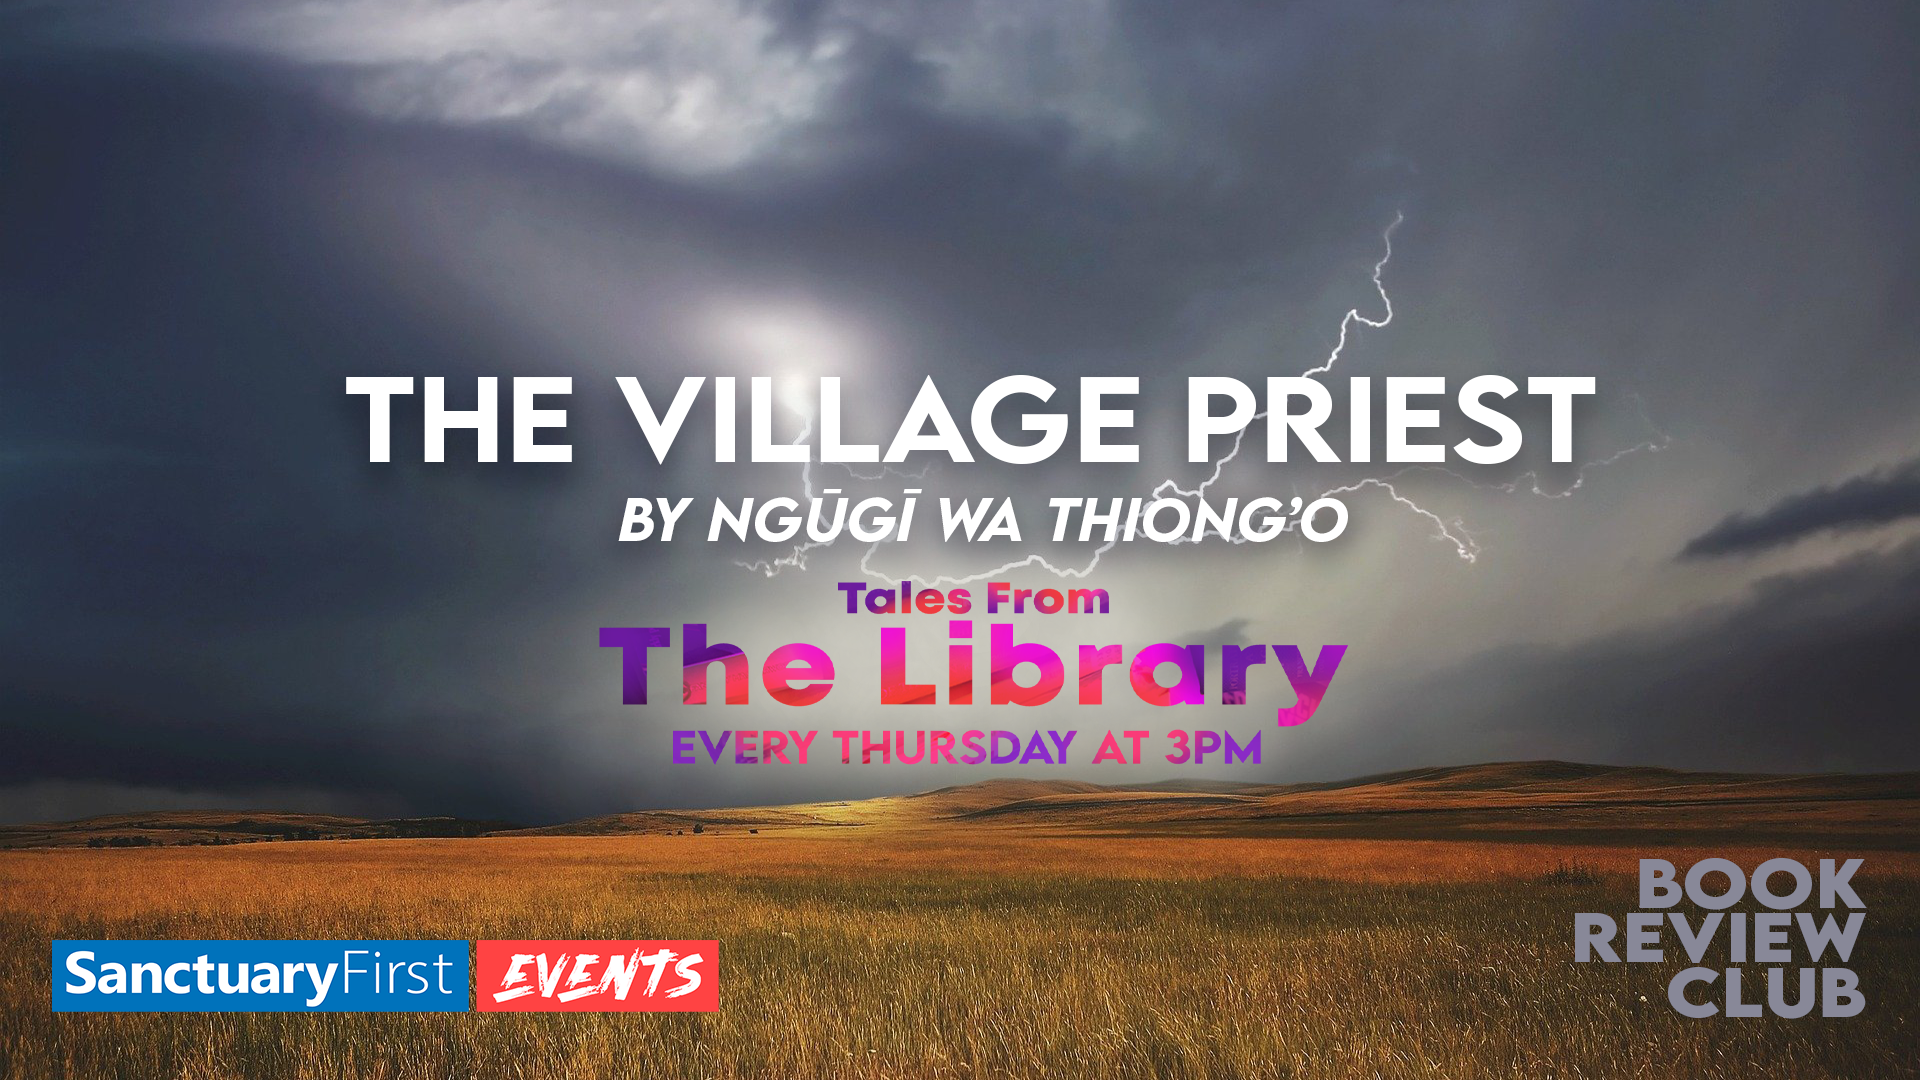 Tales From The Library - The Village Priest